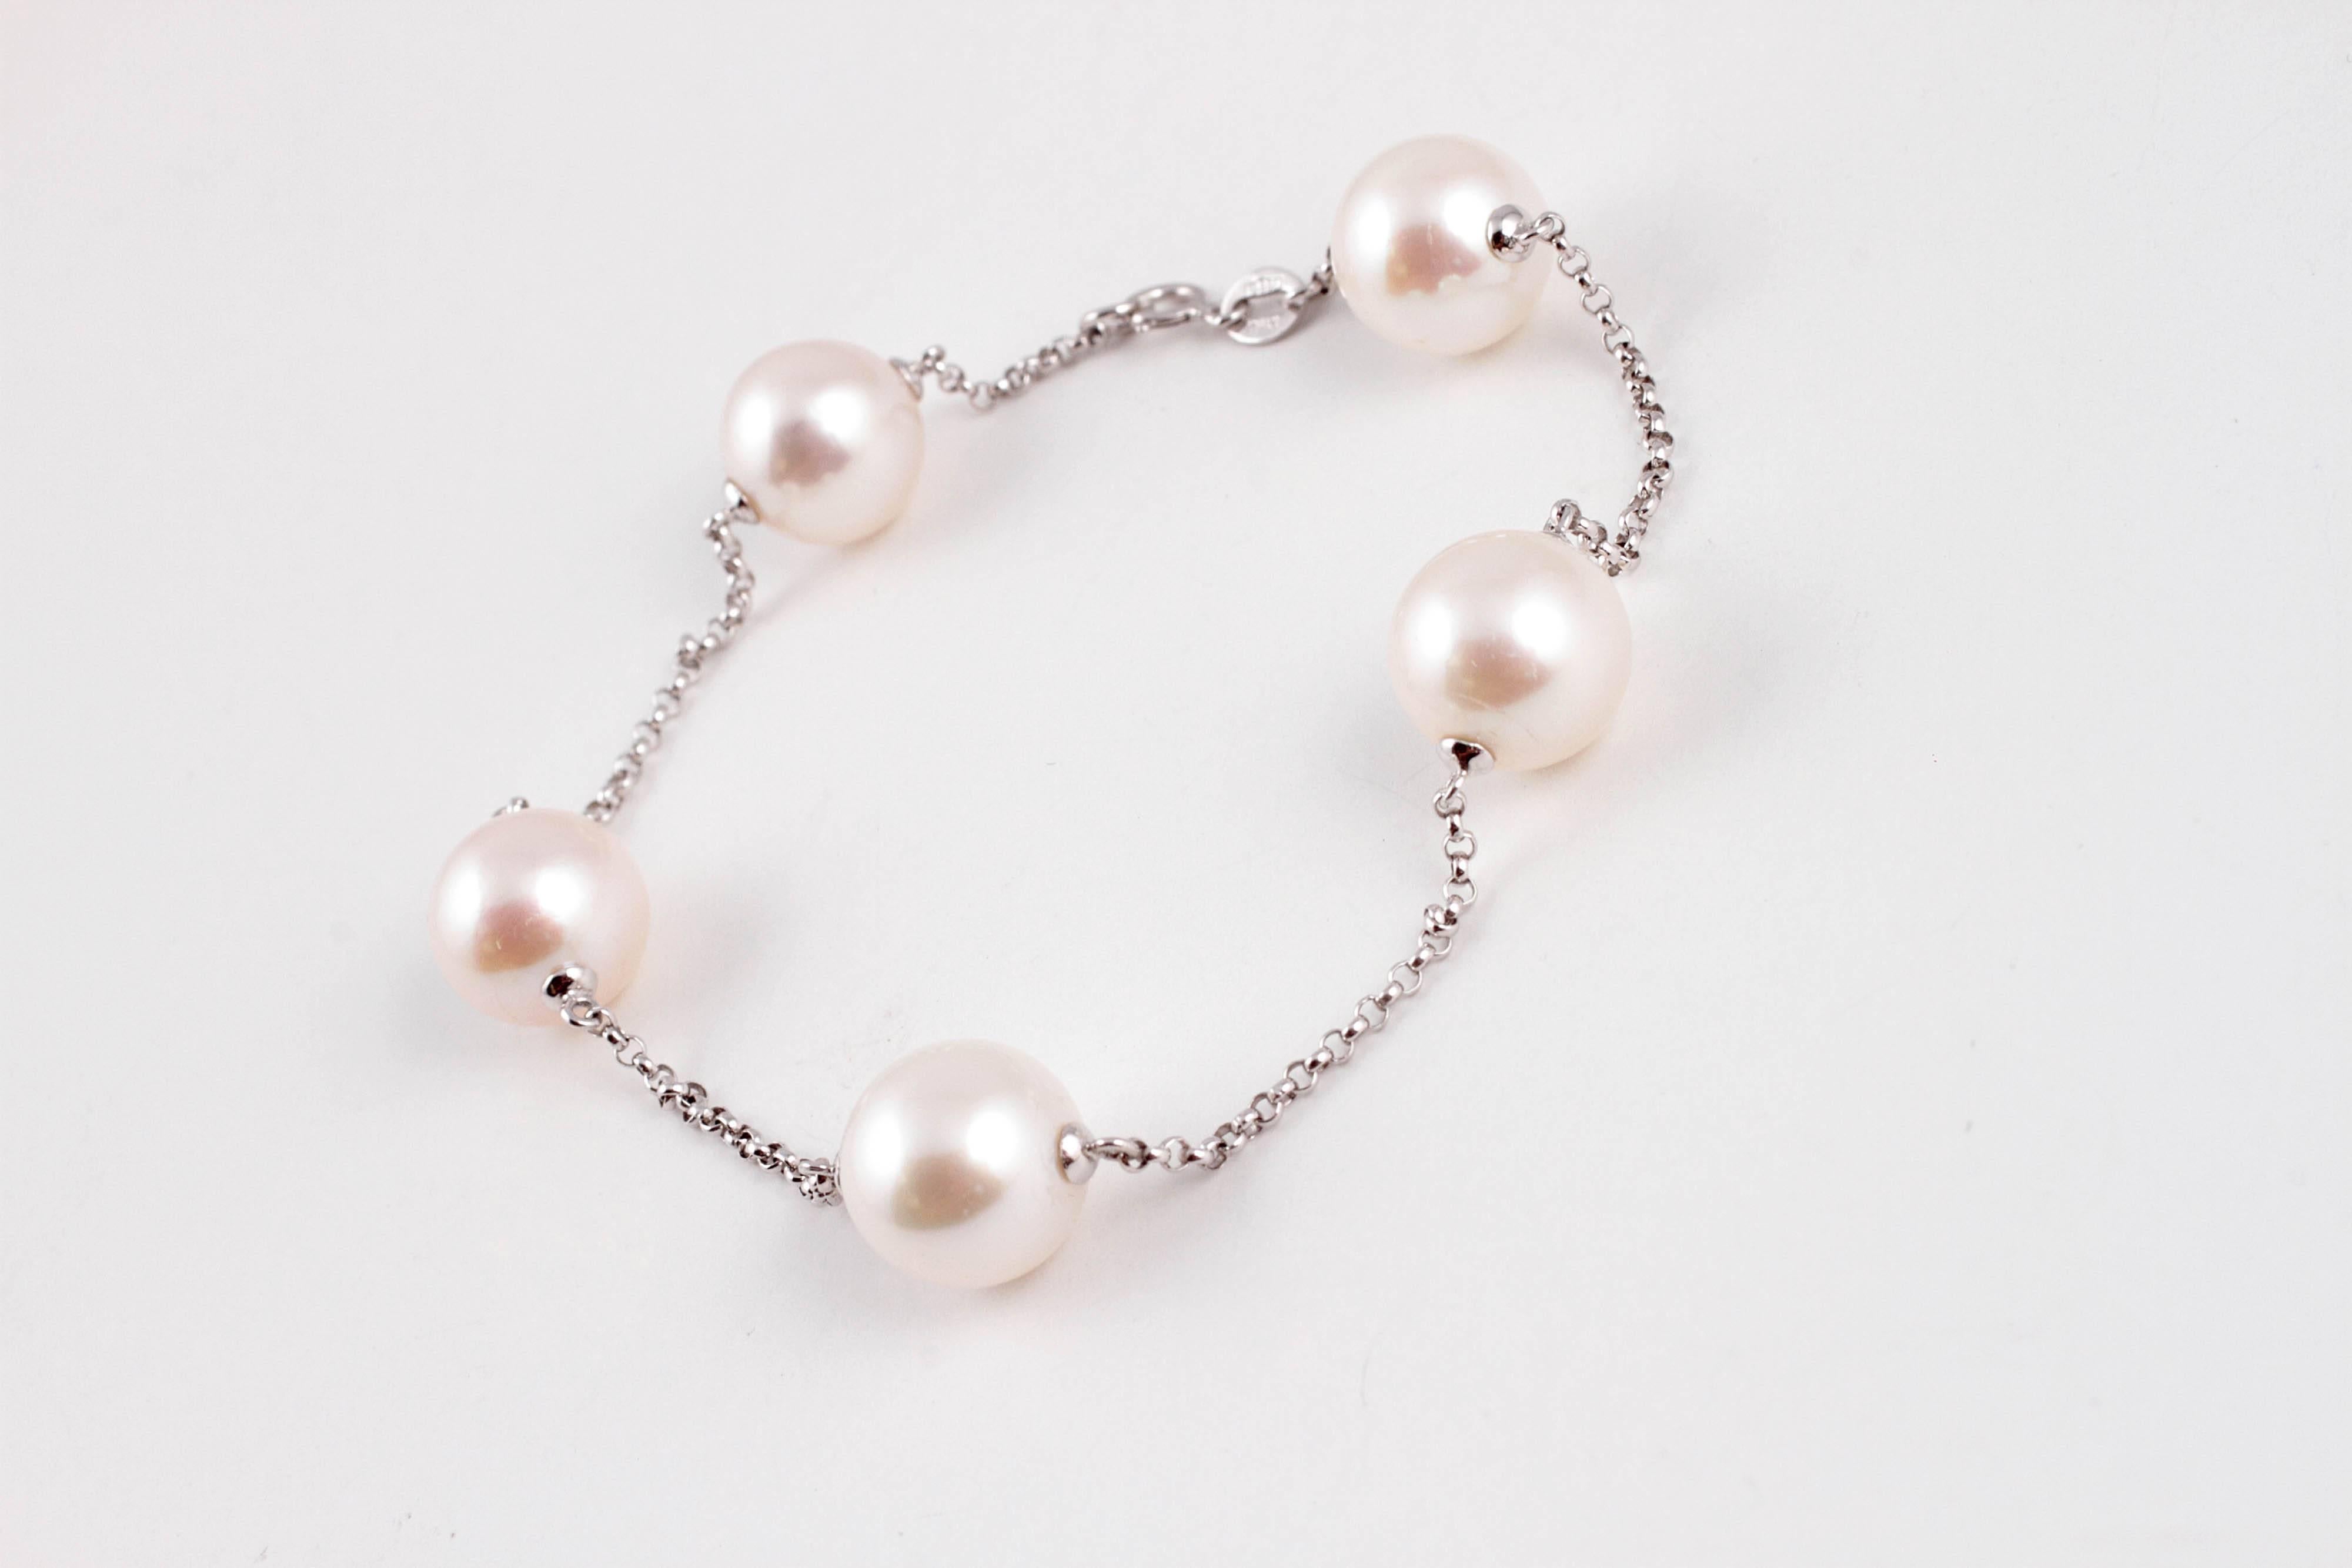 Mastoloni 11.00 mm South Sea cultured pearls stationed on a 8.75 inch 14 karat white gold bracelet.  